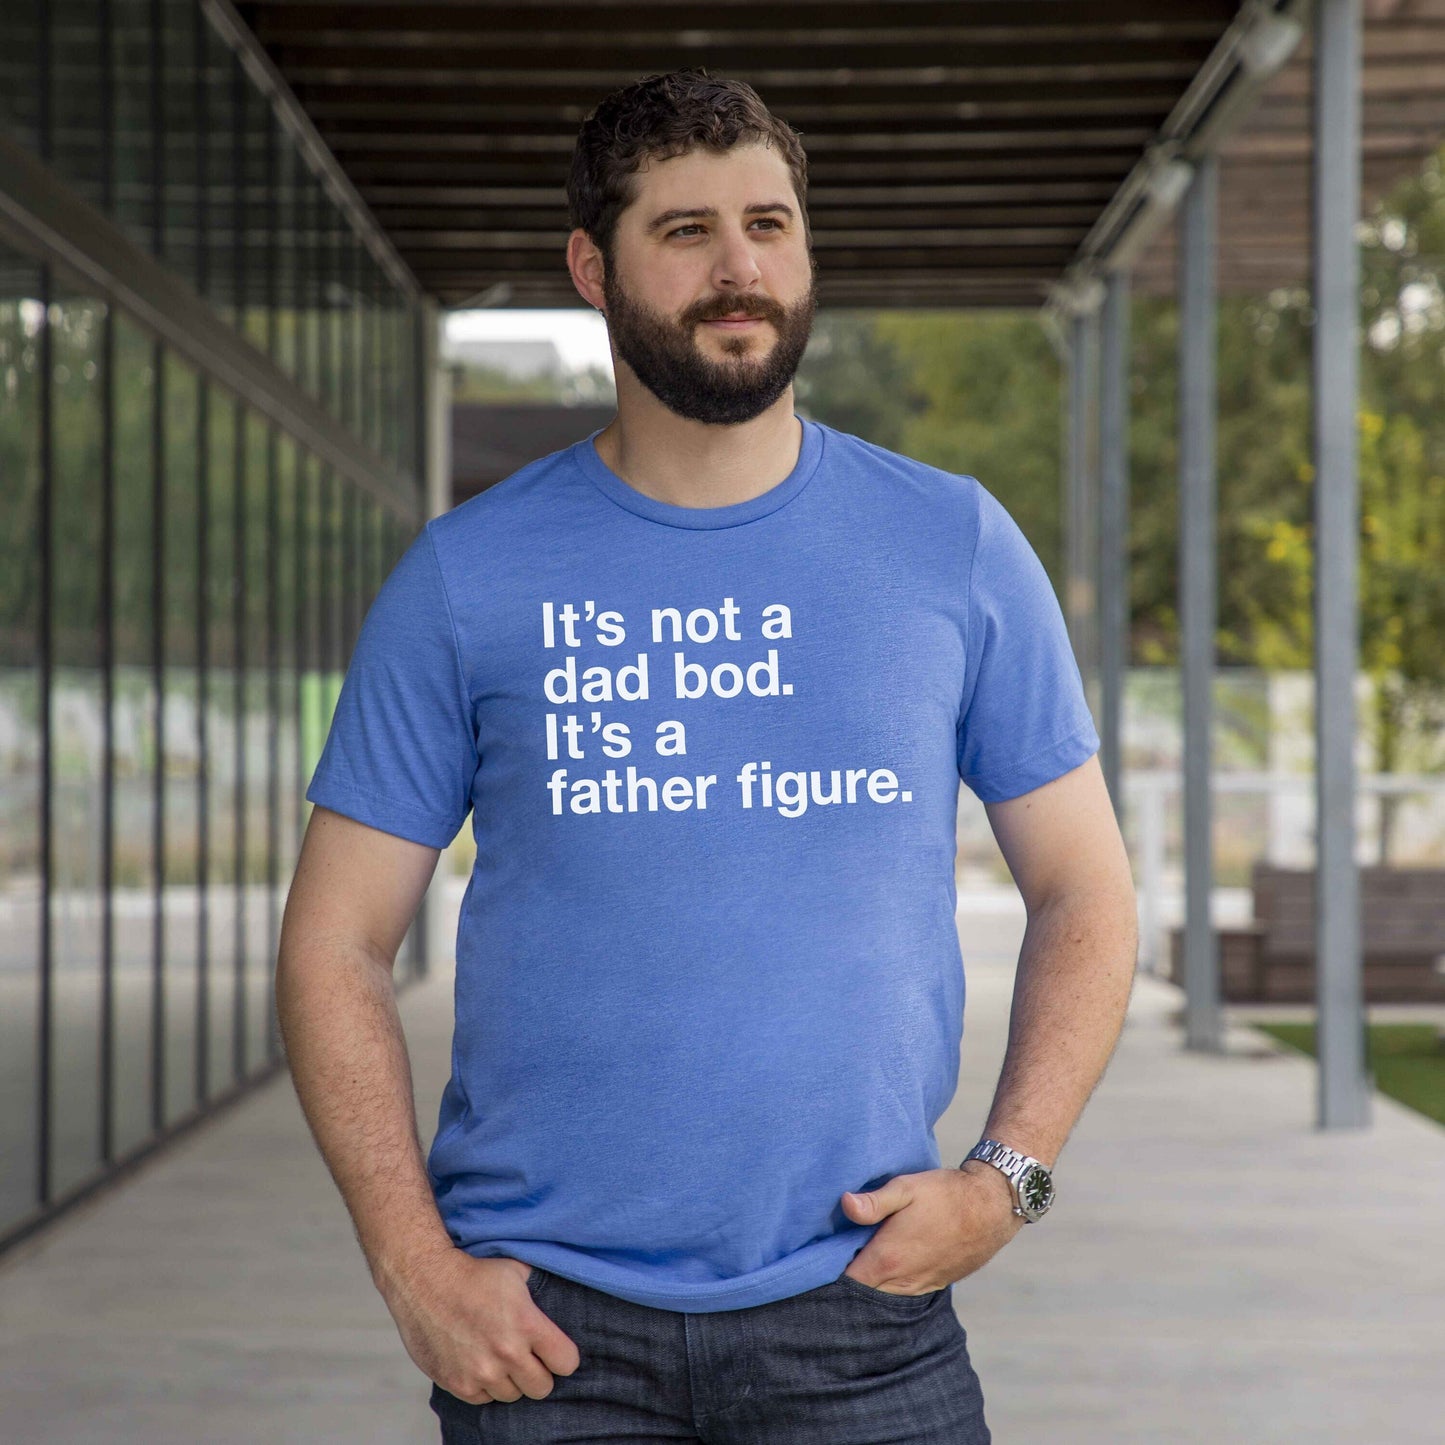 Not a Dad Bod Shirt - Father's Day Shirt - Dad Joke Shirt - Gifts for Dad - Dad Birthday Gift - Dad Joke Shirt - Father Figure